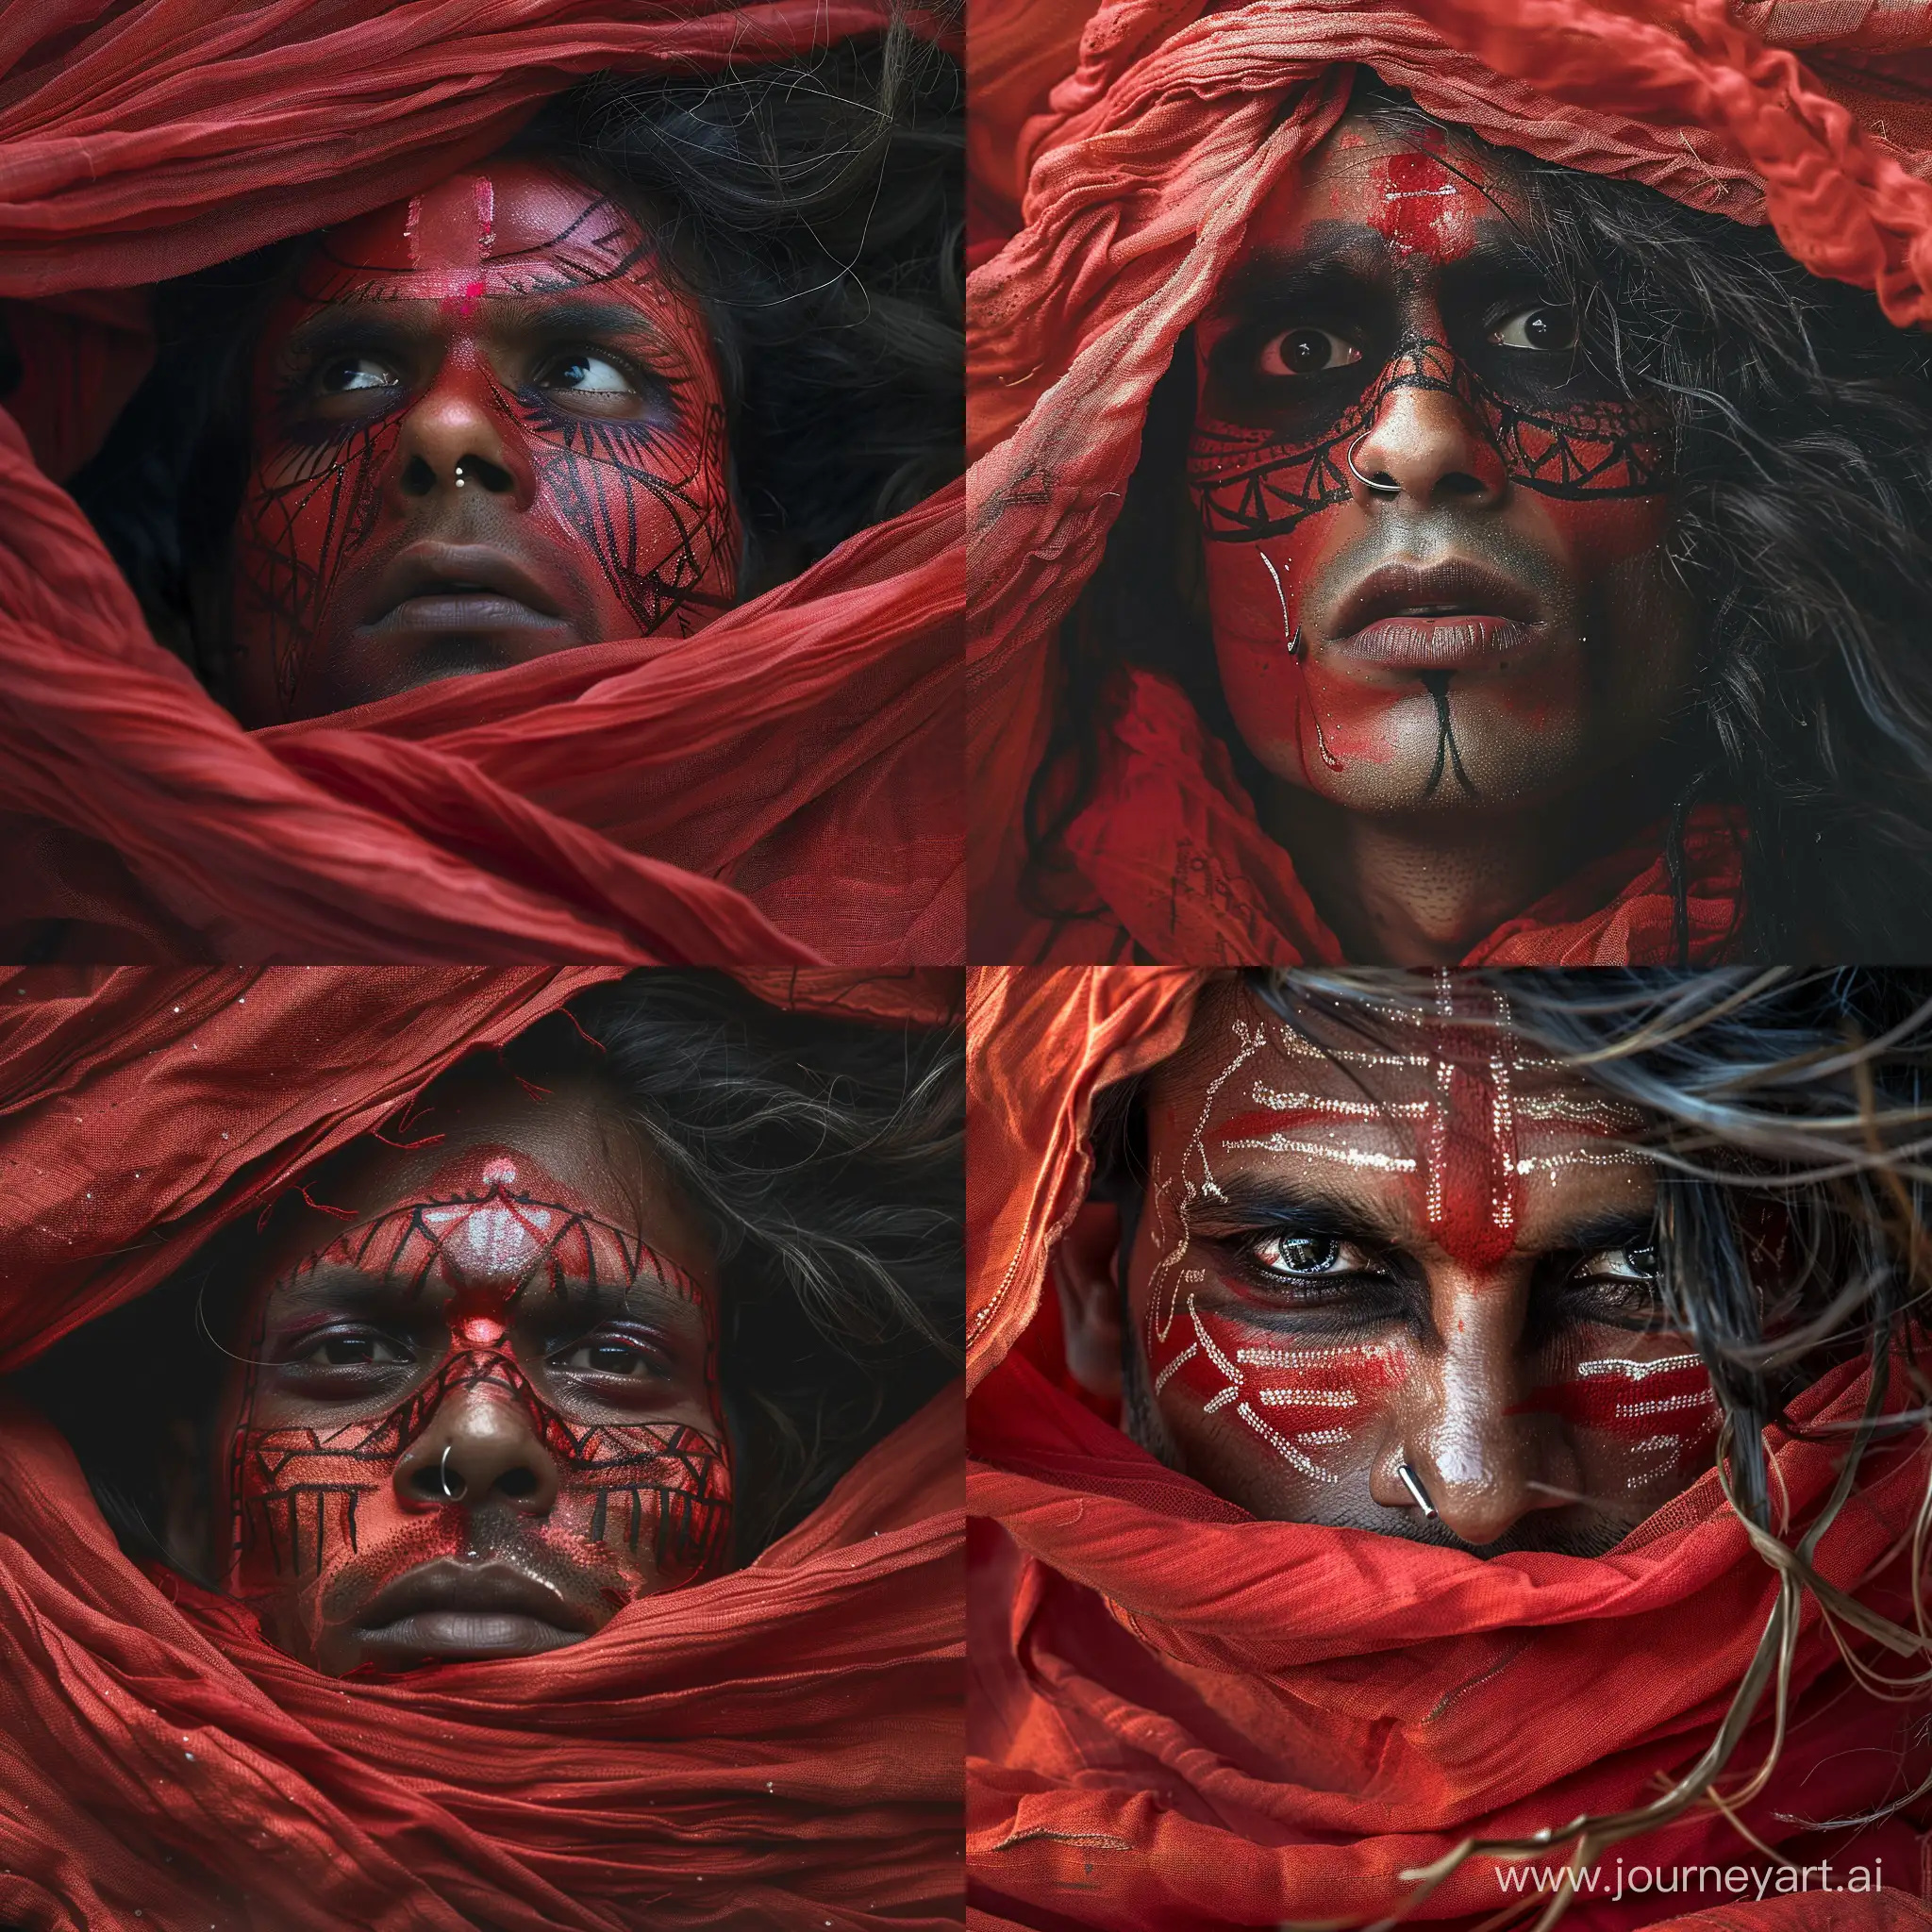 Face of ancient sounth indian masculine man face painted like a theyyam in kasaragod. He had intense eye make up like theyyam. He is partially covered his face by a red cotton fabric which has simple geometric pattern on it. He has long flowy hair which moves in wind, he has nose pin, his eyes are teary still intense, his face is tilted upward and look bit side way, the shot have an action effect, he is dark handsome and young, from ancient kerala